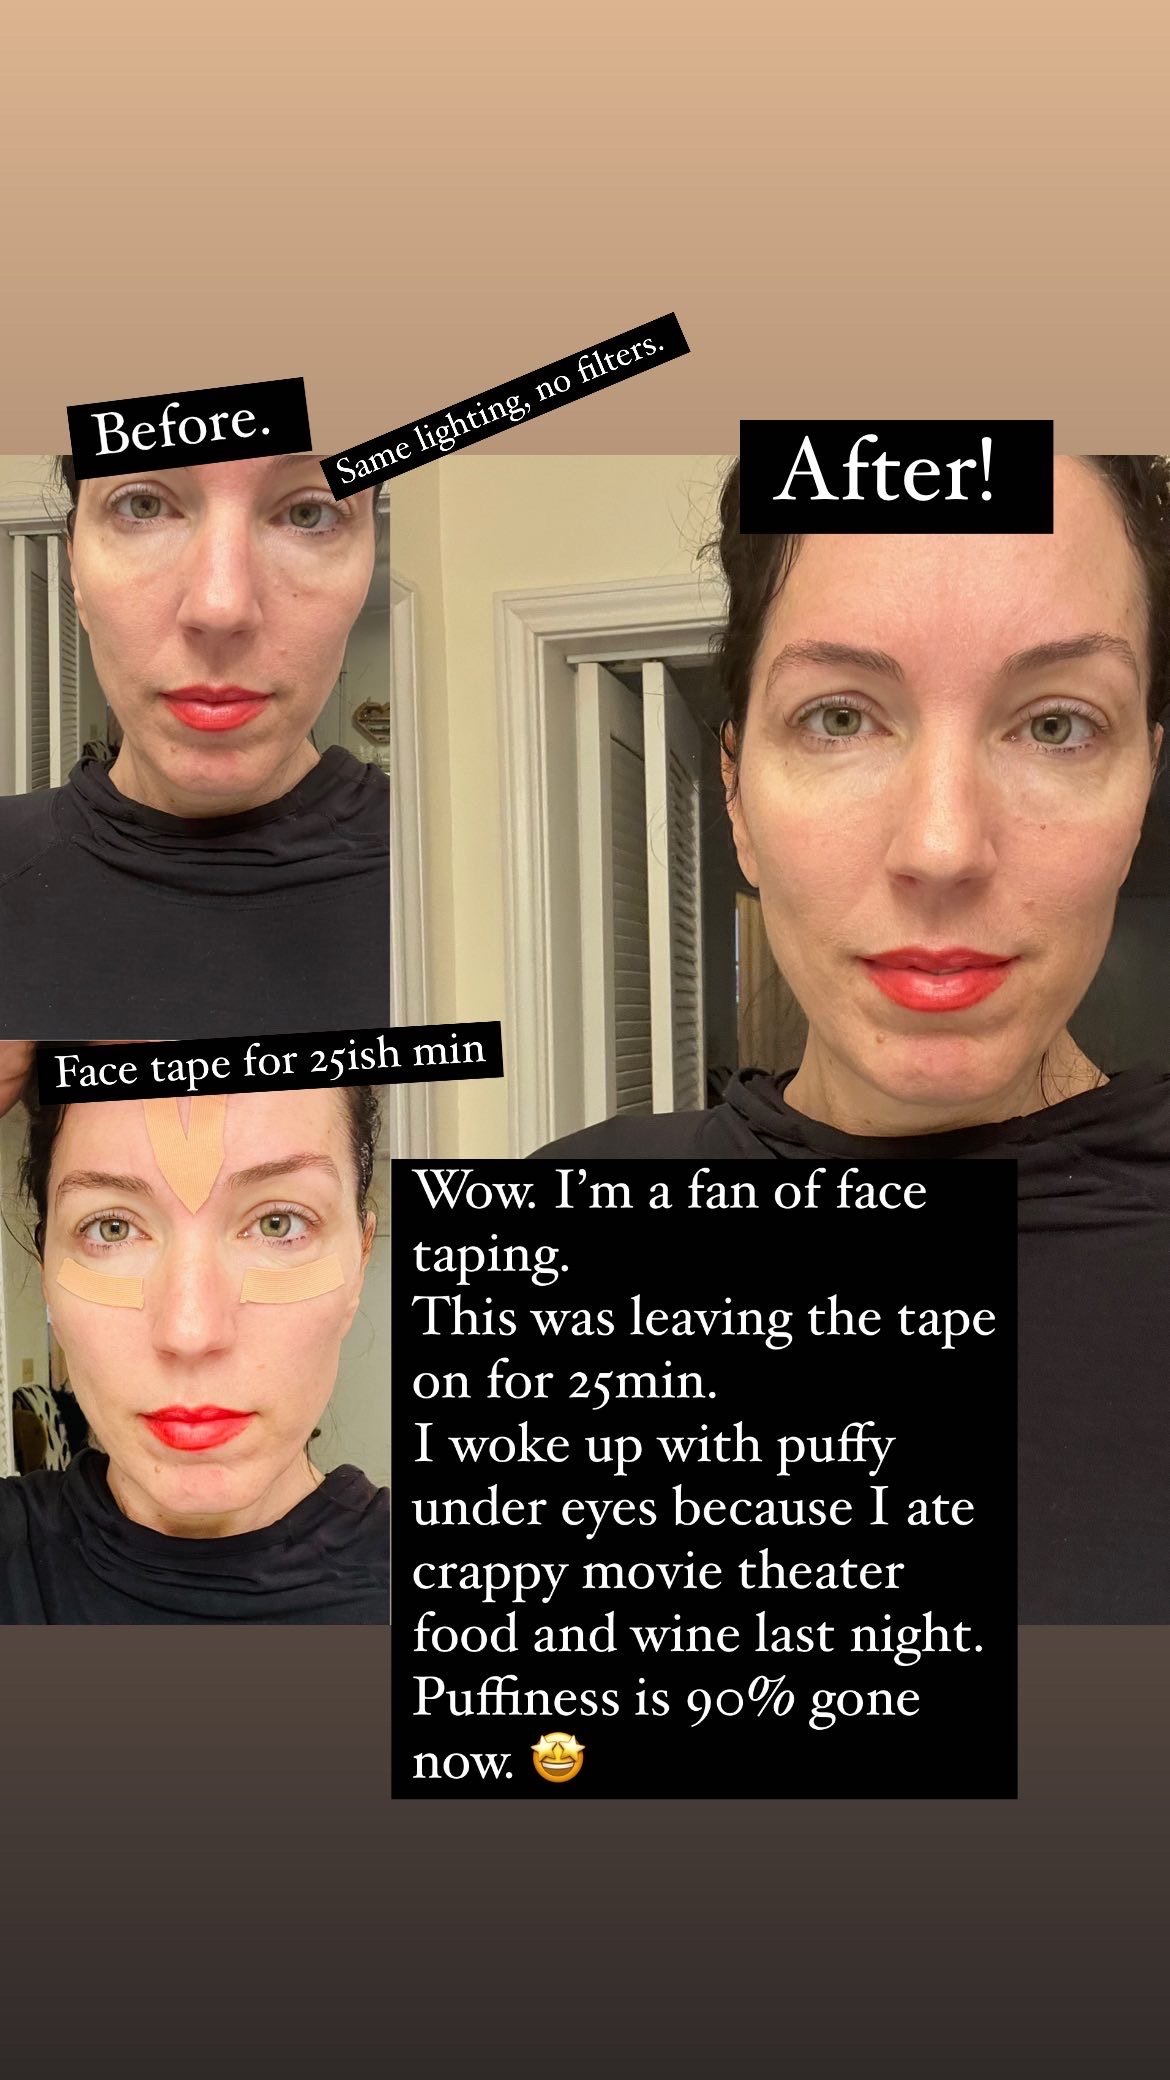 Face Taping for the Win! — Valentine Care by Dr. Jenna Valentine